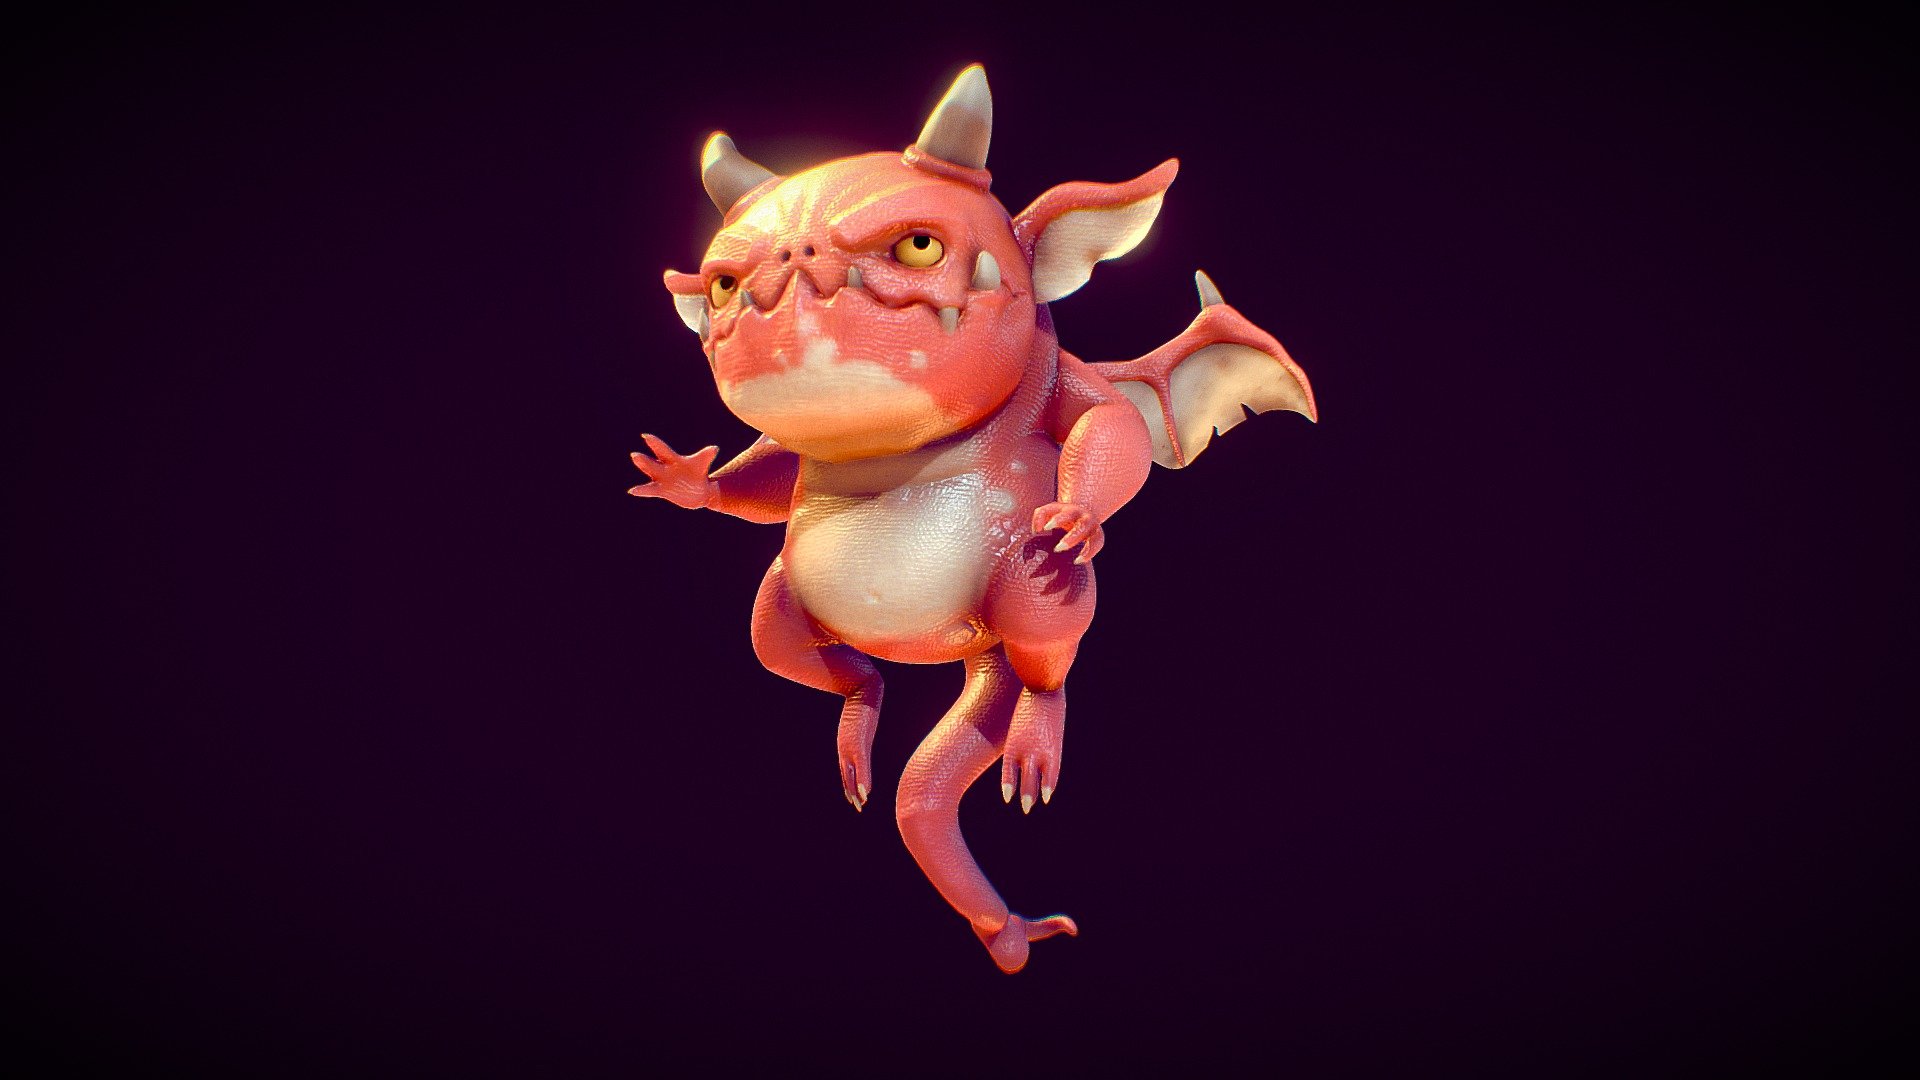 Baby Drake based on a concept by @drawsgood found on artstation, made using Zbrush, Blender and Substance Painter 3d model